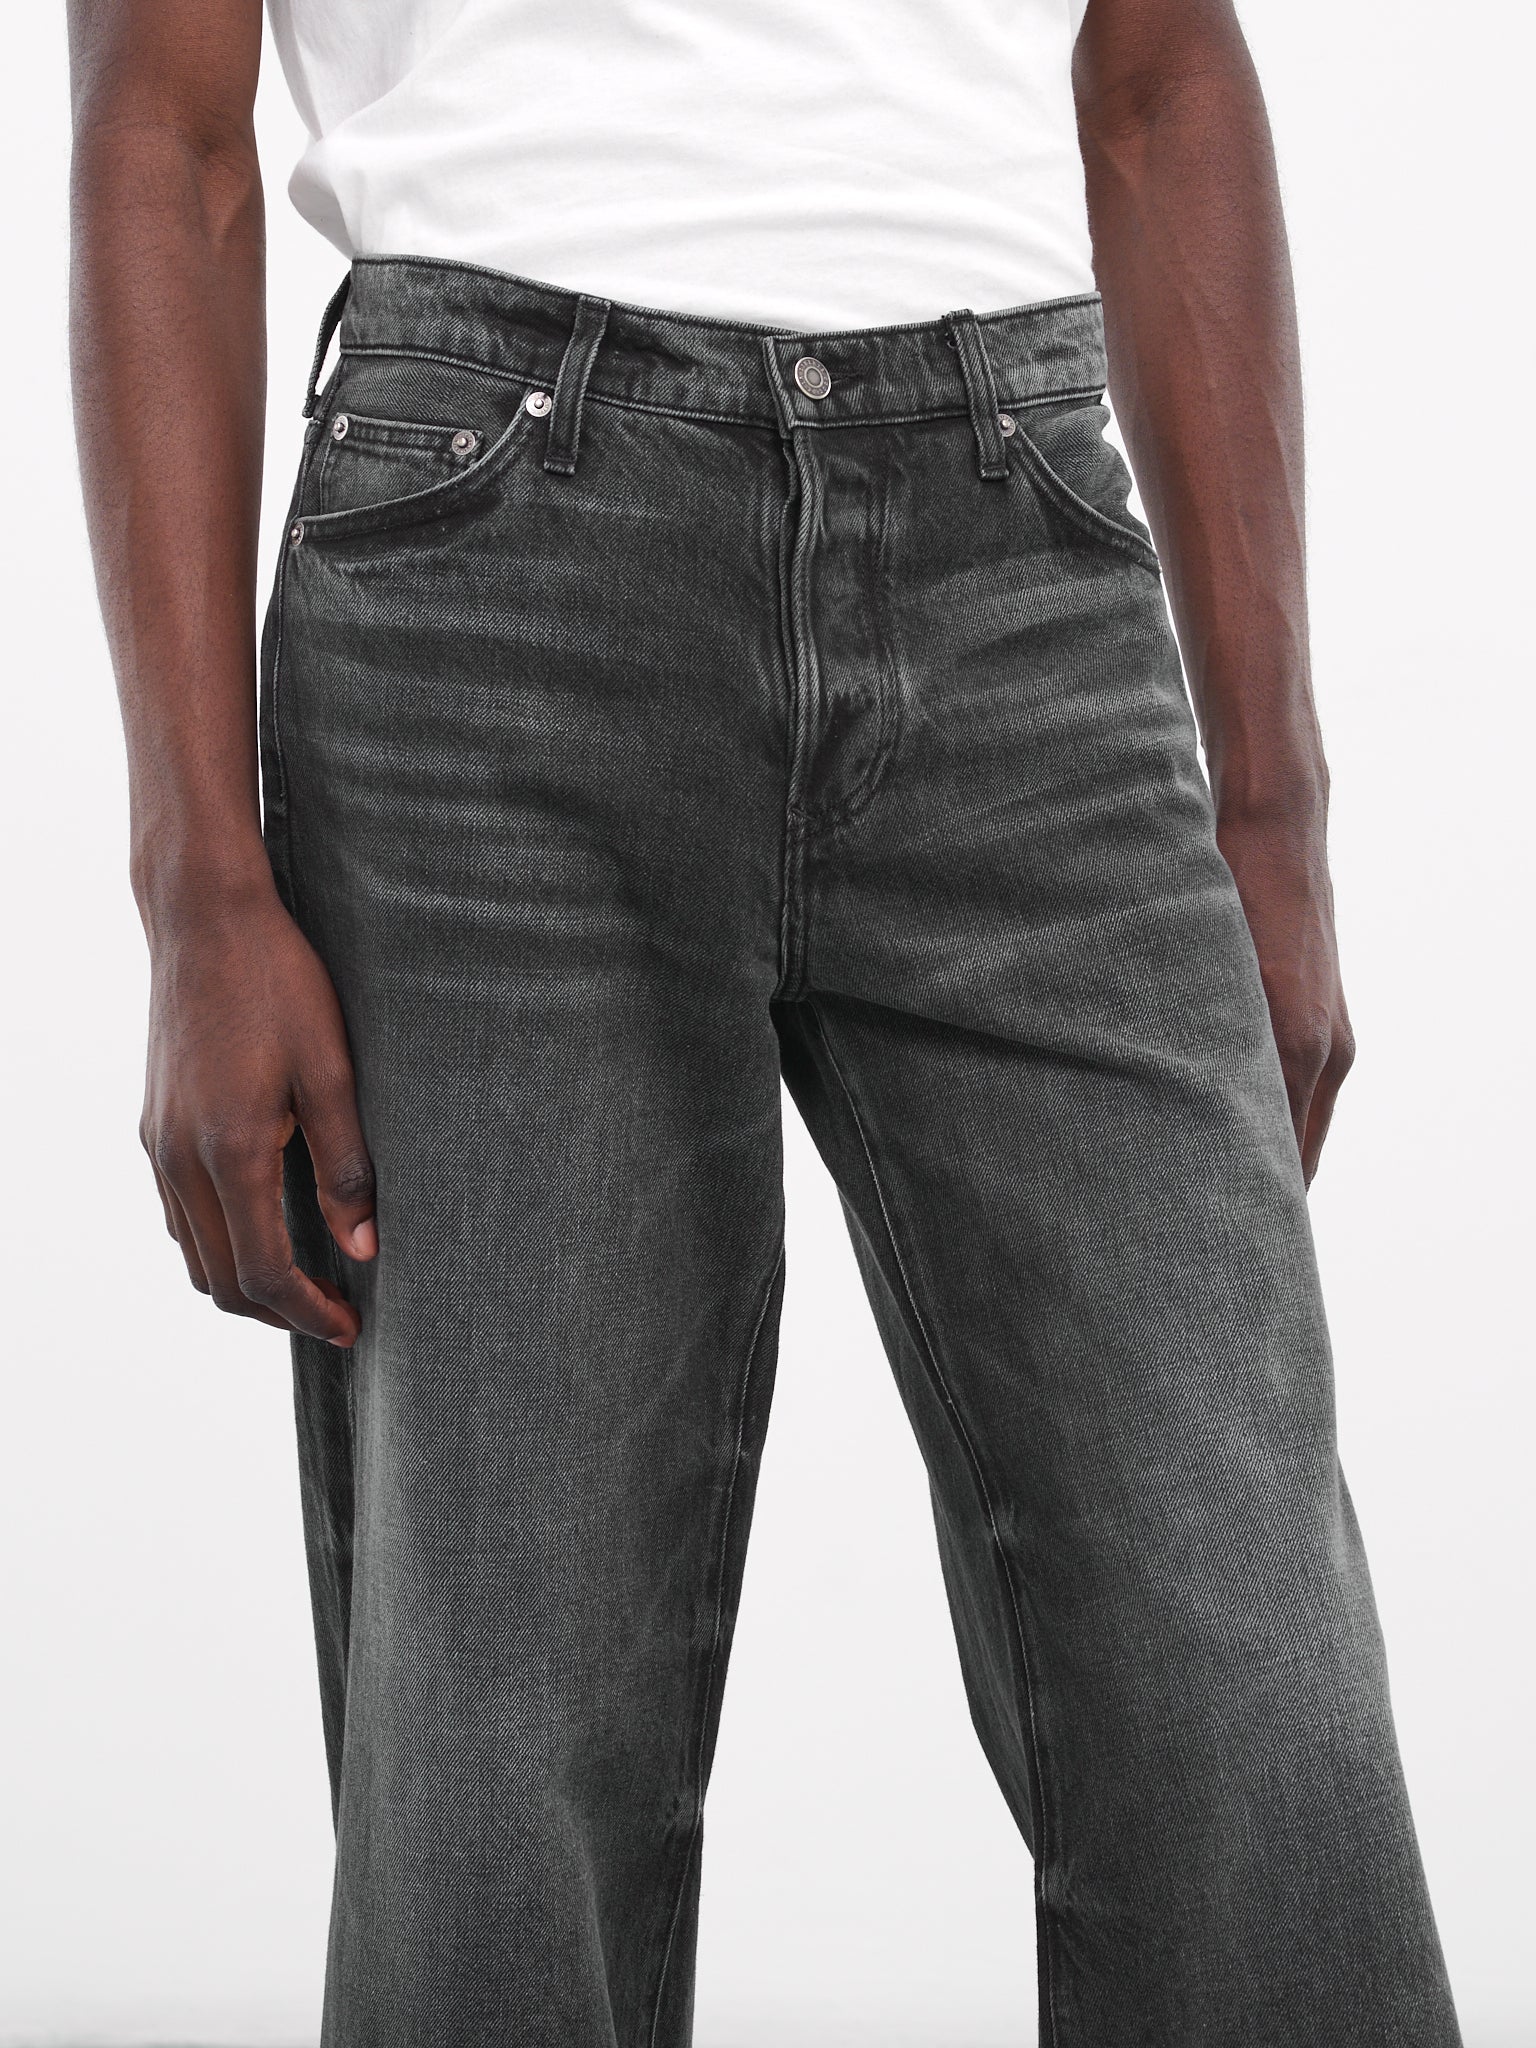 ACNE STUDIOS Distressed faded denim jeans | THE OUTNET